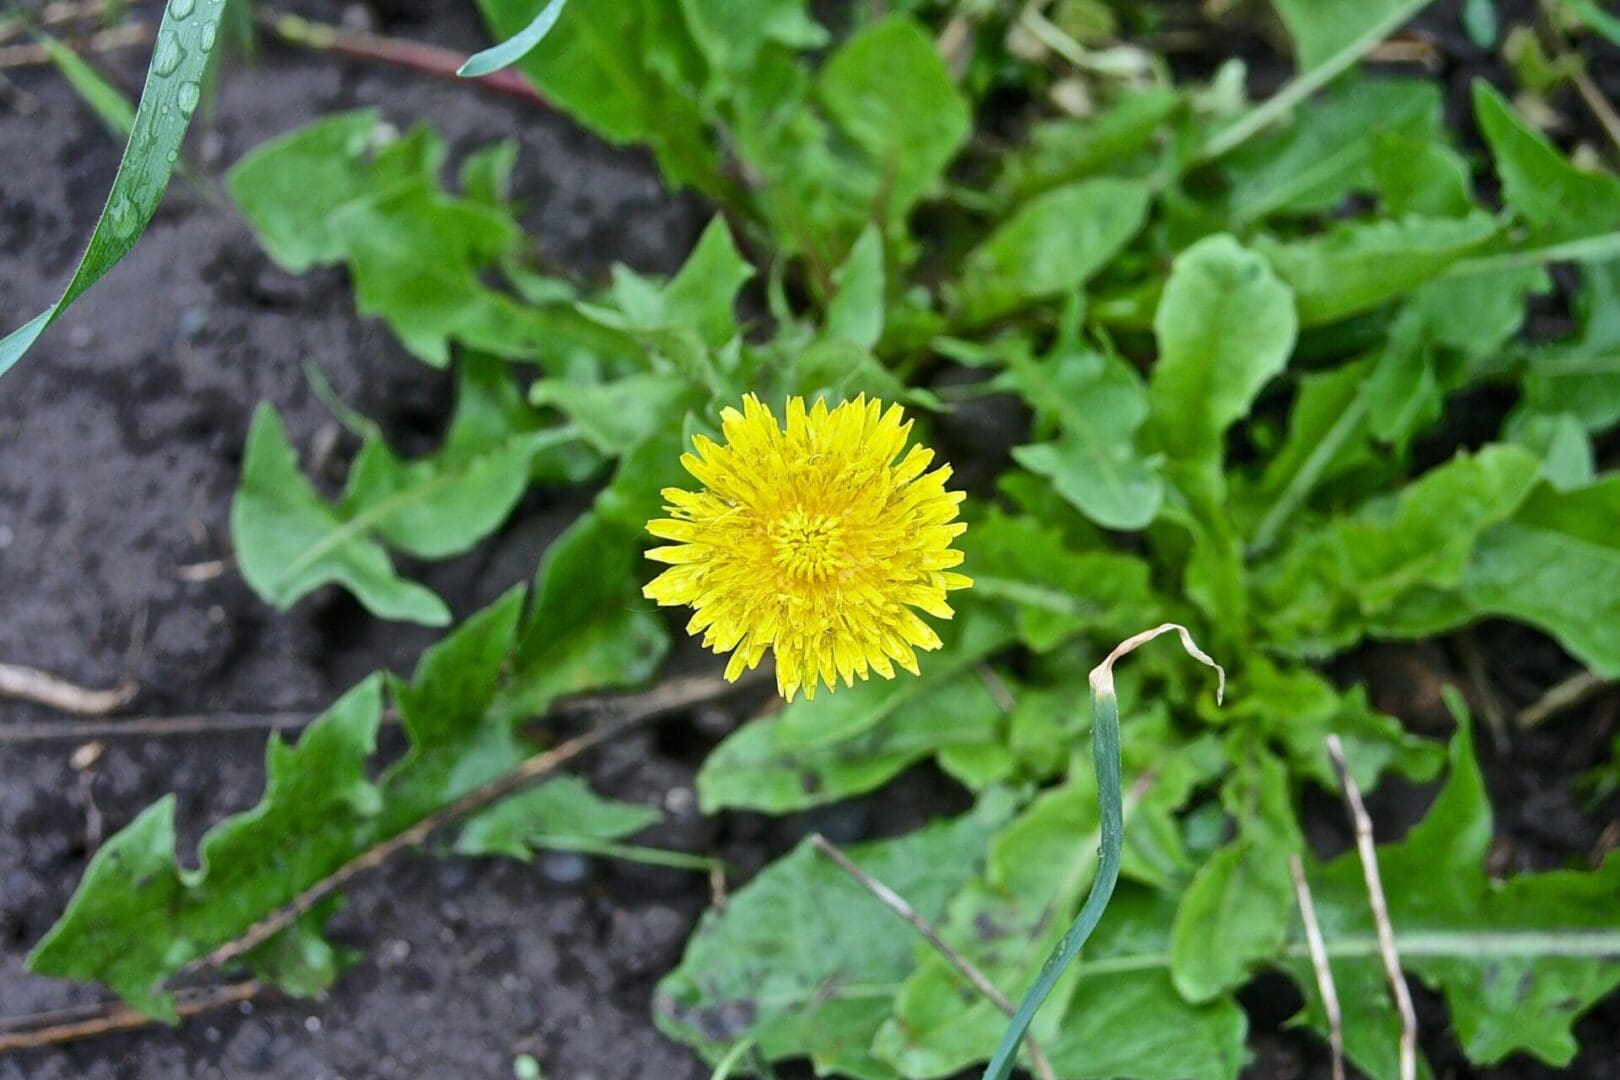 A yellow dandelion growing in the dirt.